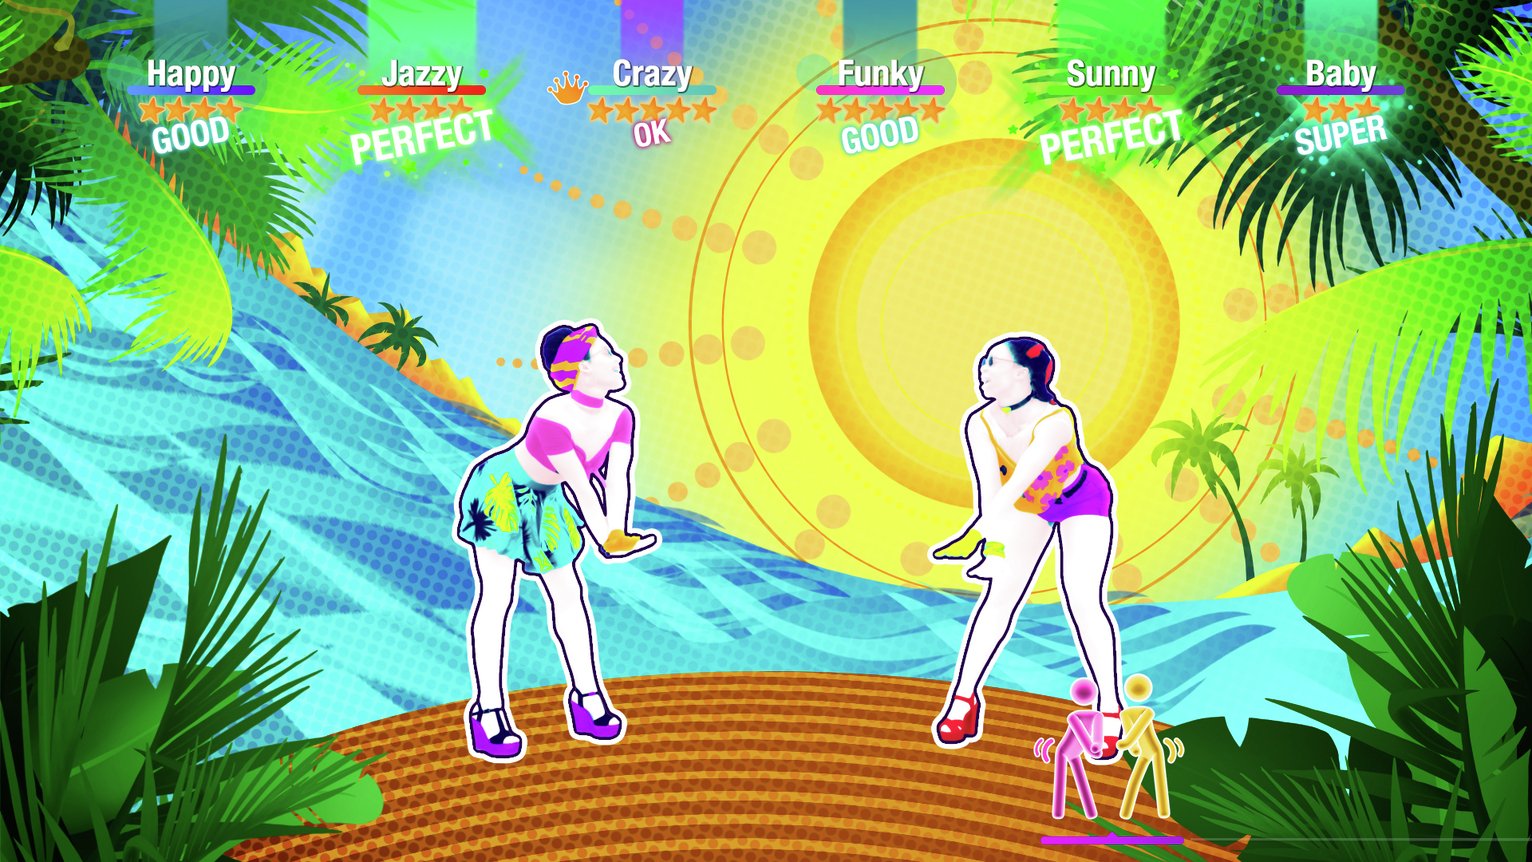 just dance 2020 switch game